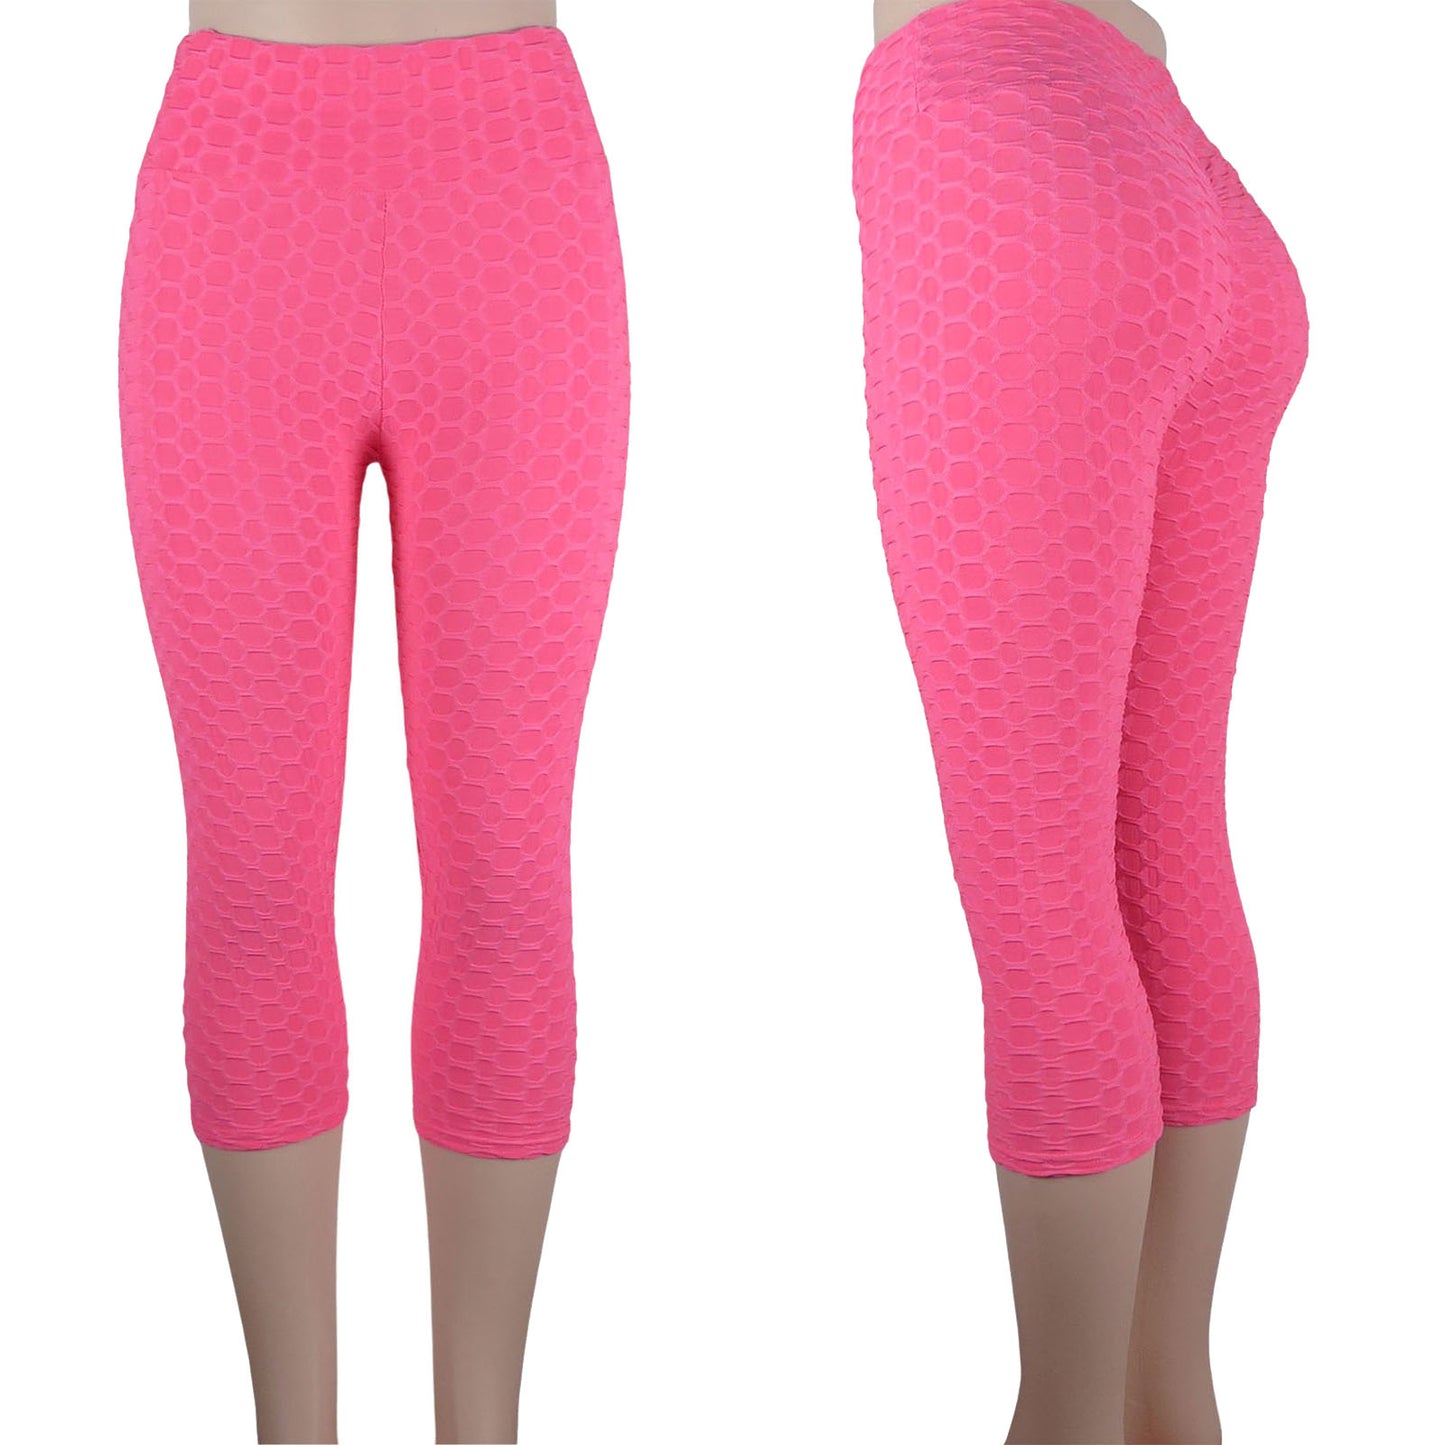 TOWED22 Womens Thermal Leggings,Women's High Waisted Capri Leggings Print  Collection High Waist Women Leggings Compression Pants for Yoga(Pink,XL) 